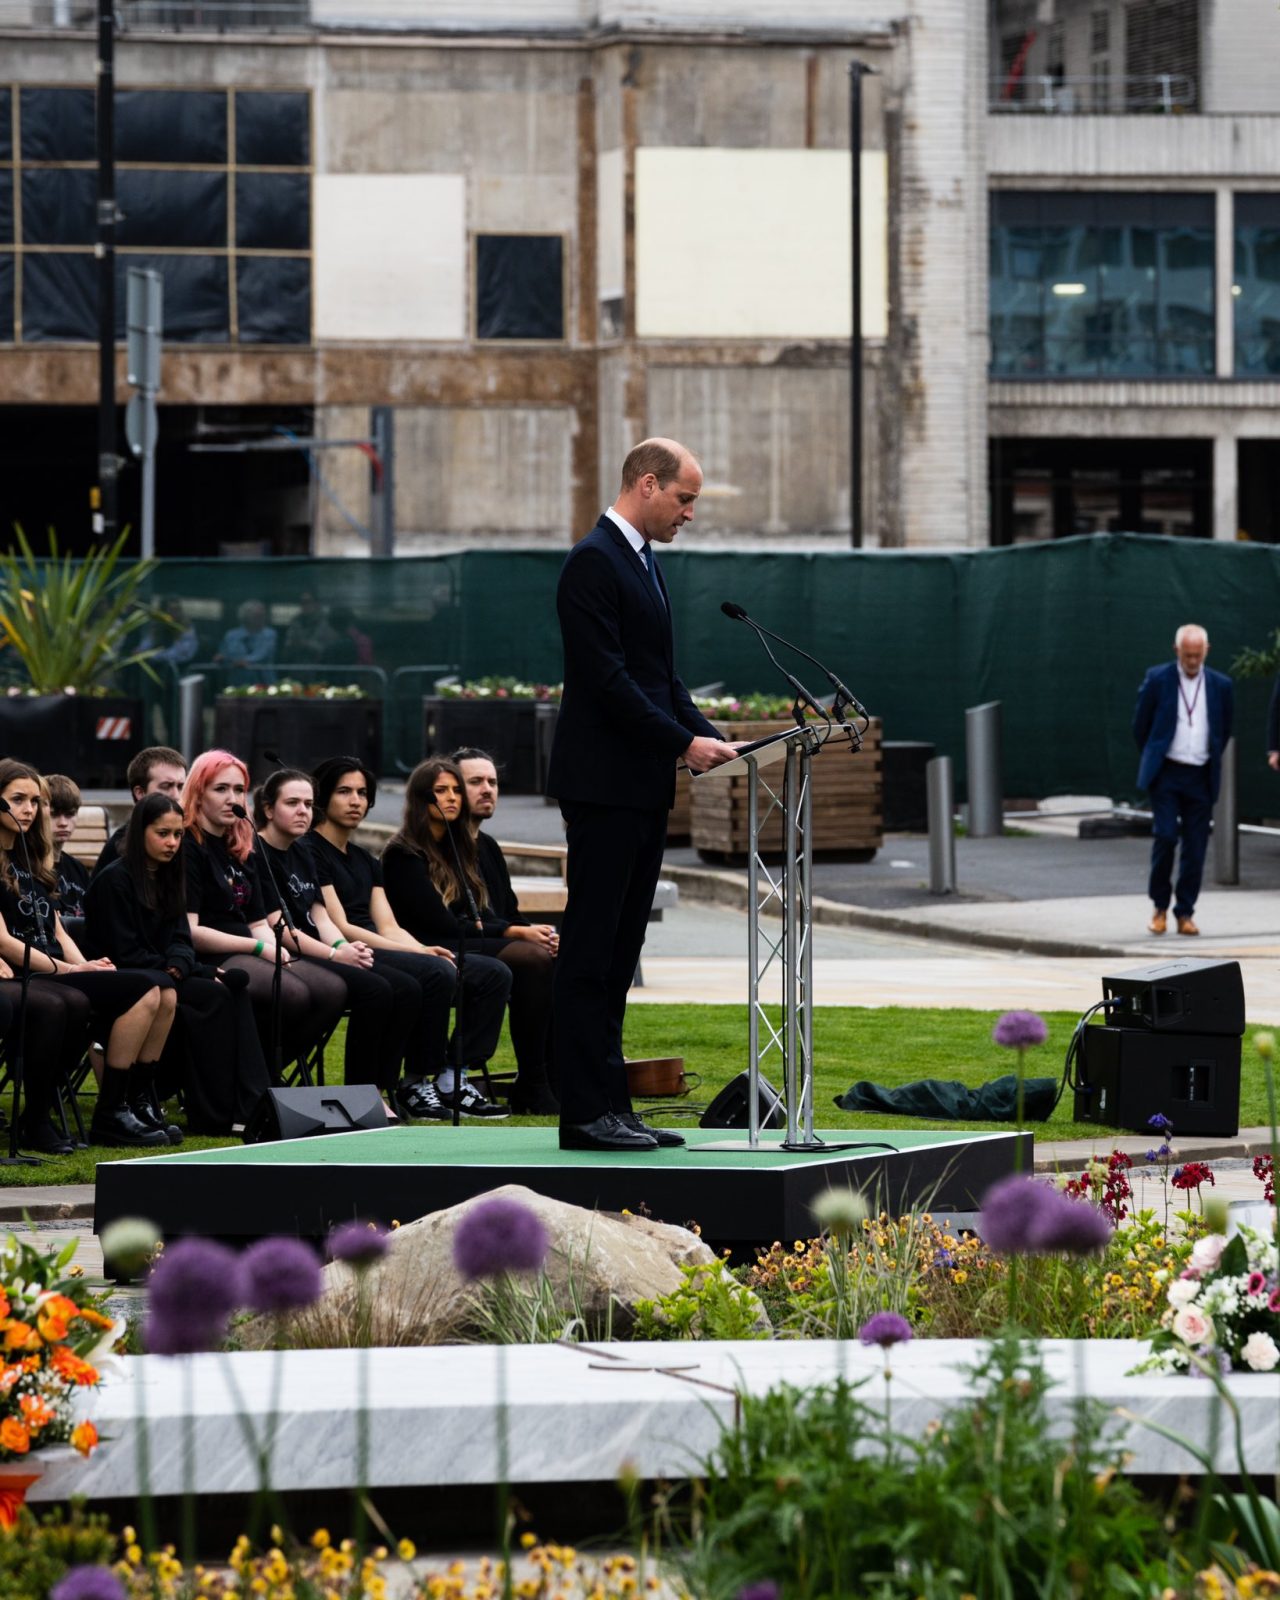 Prince William and Kate Middleton officially open Manchester Arena attack memorial, The Manc